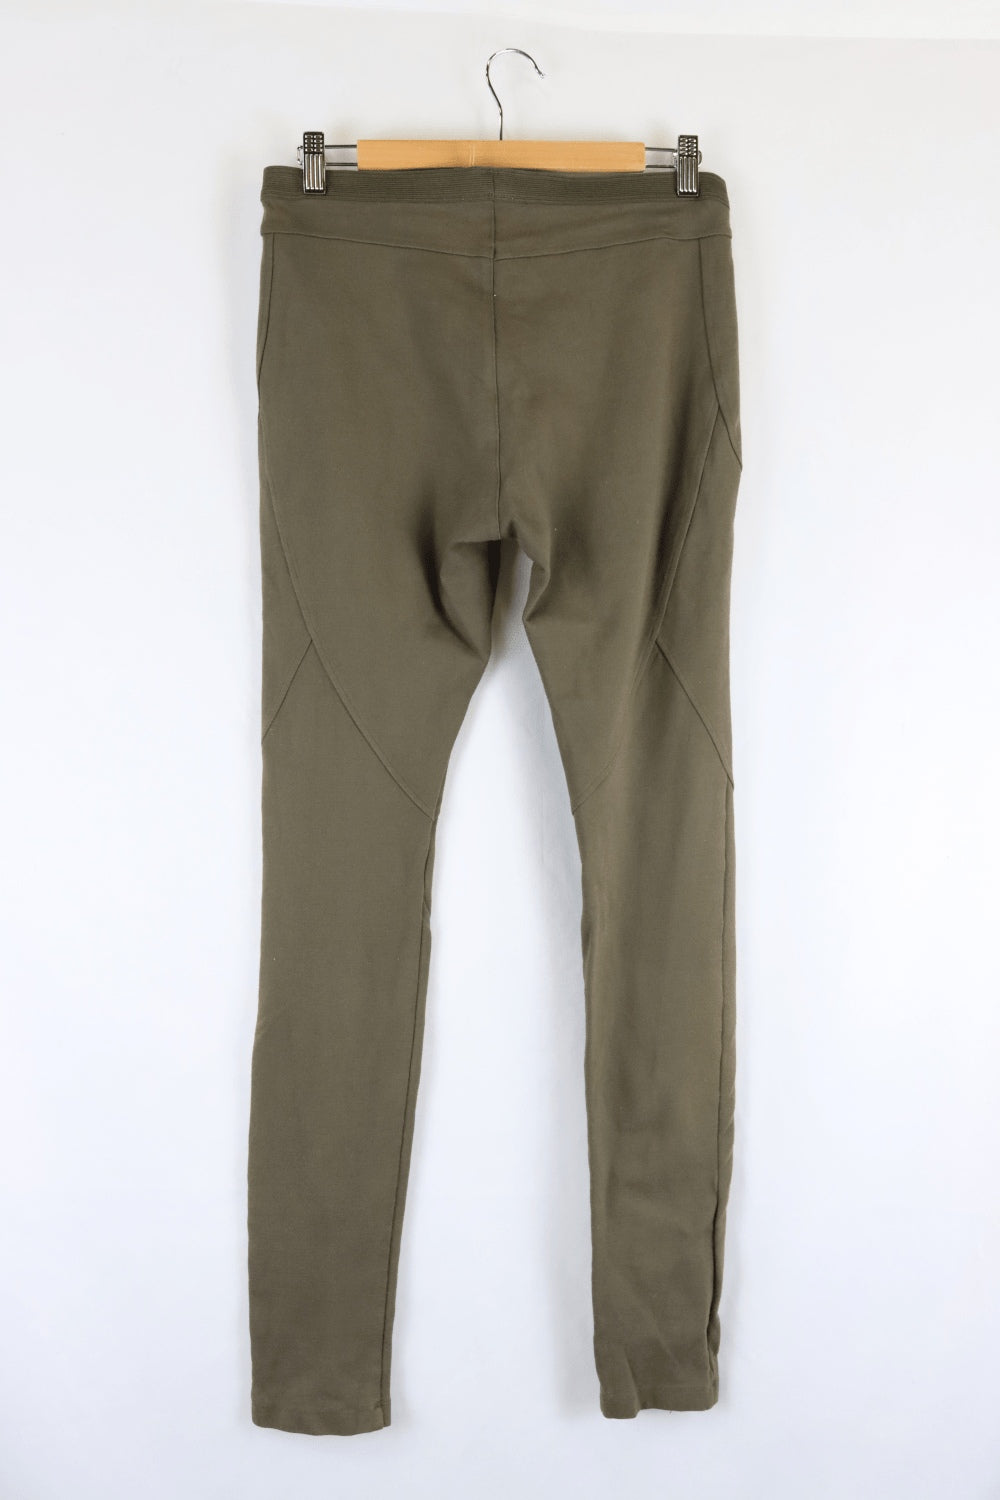 Witchery Green Pants 12